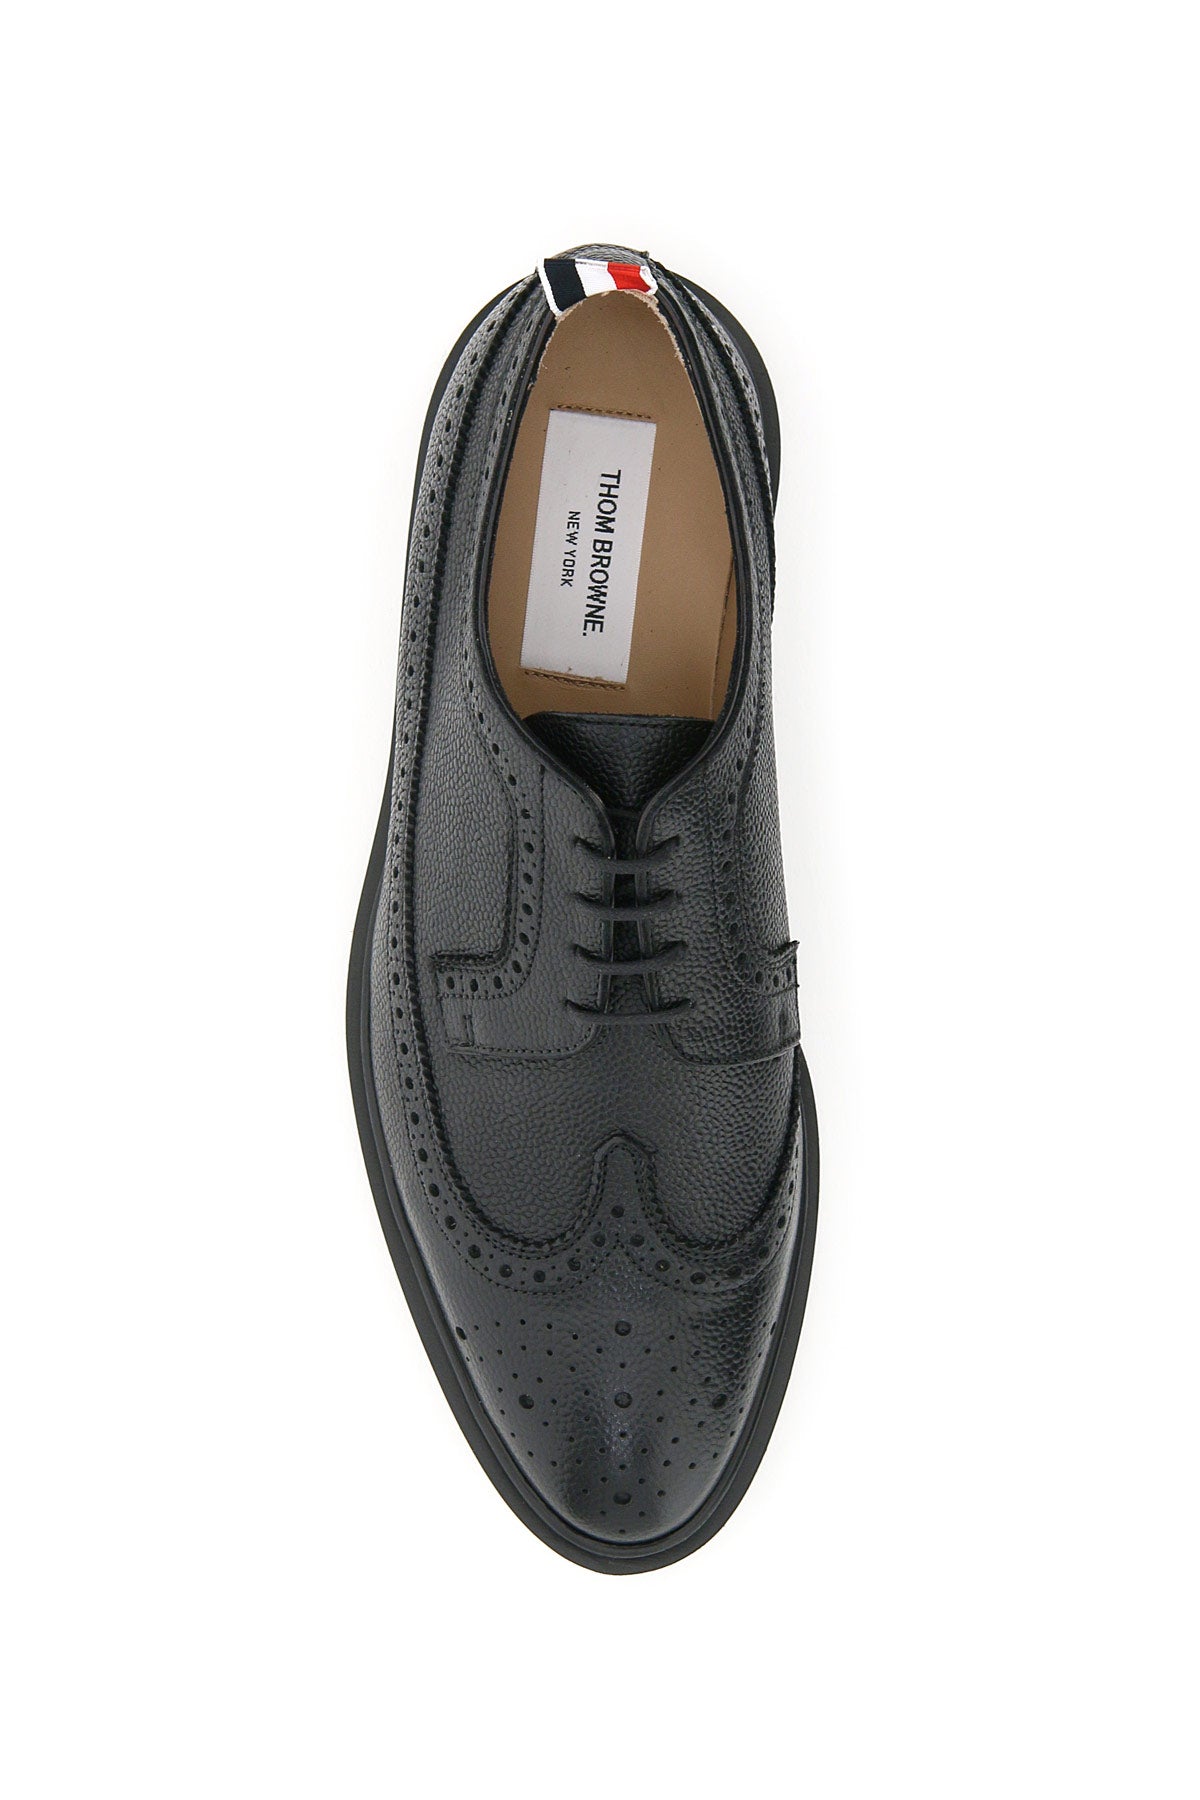 Thom browne longwing brogue lace-up shoes-1